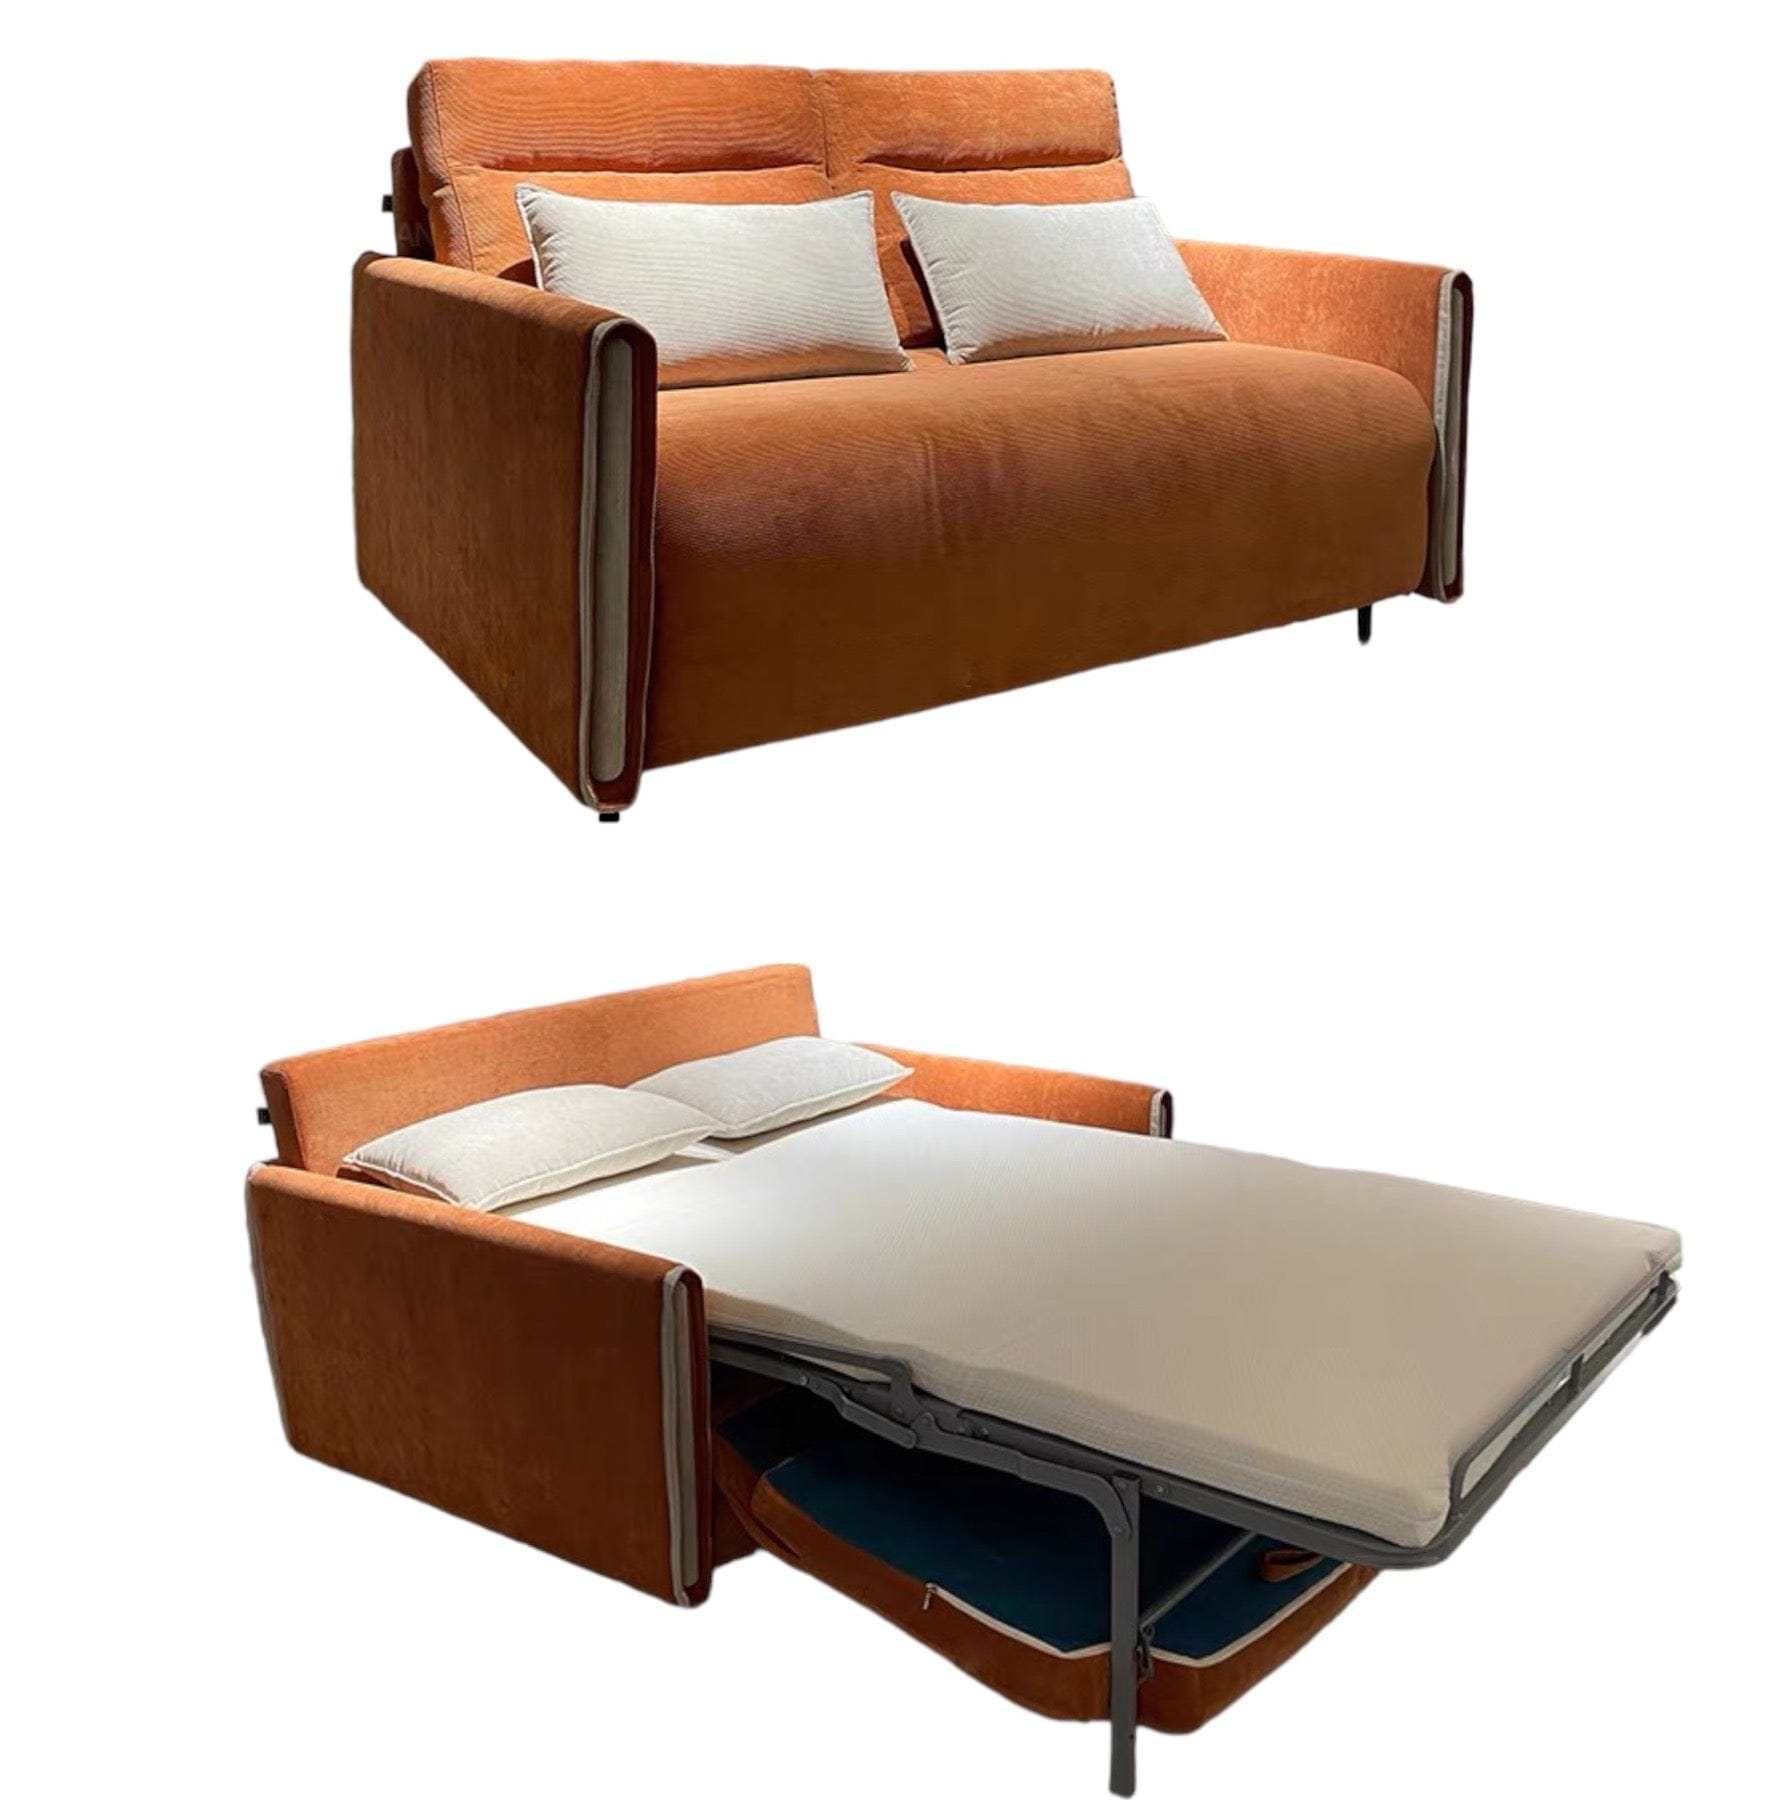 Home Atelier Normanton Foldable Sofa Bed